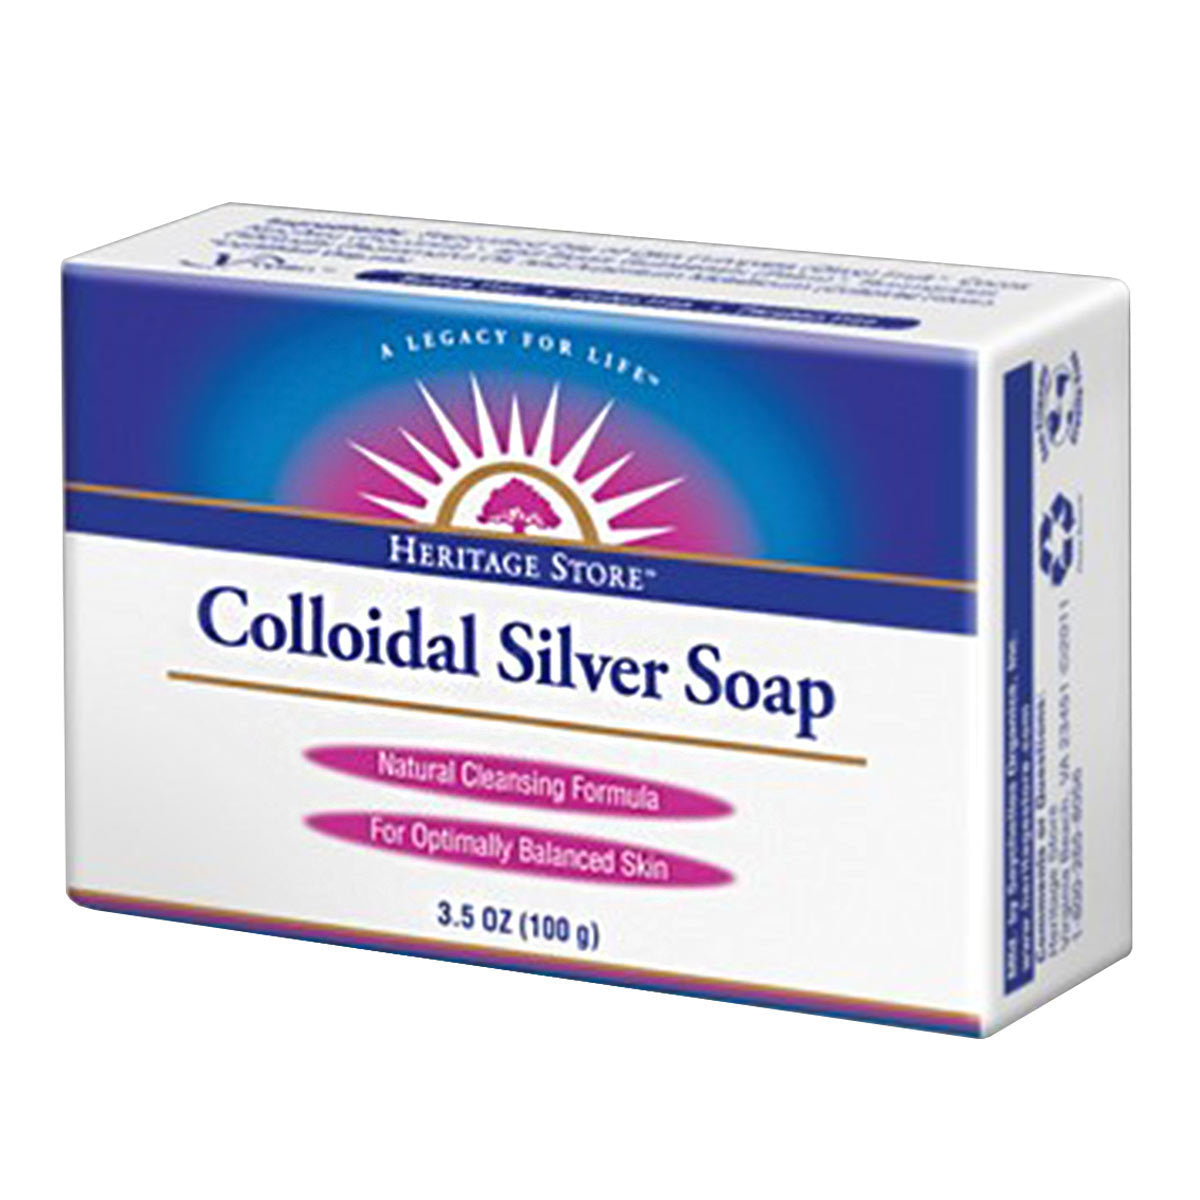 Primary image of Colloidal Silver Soap